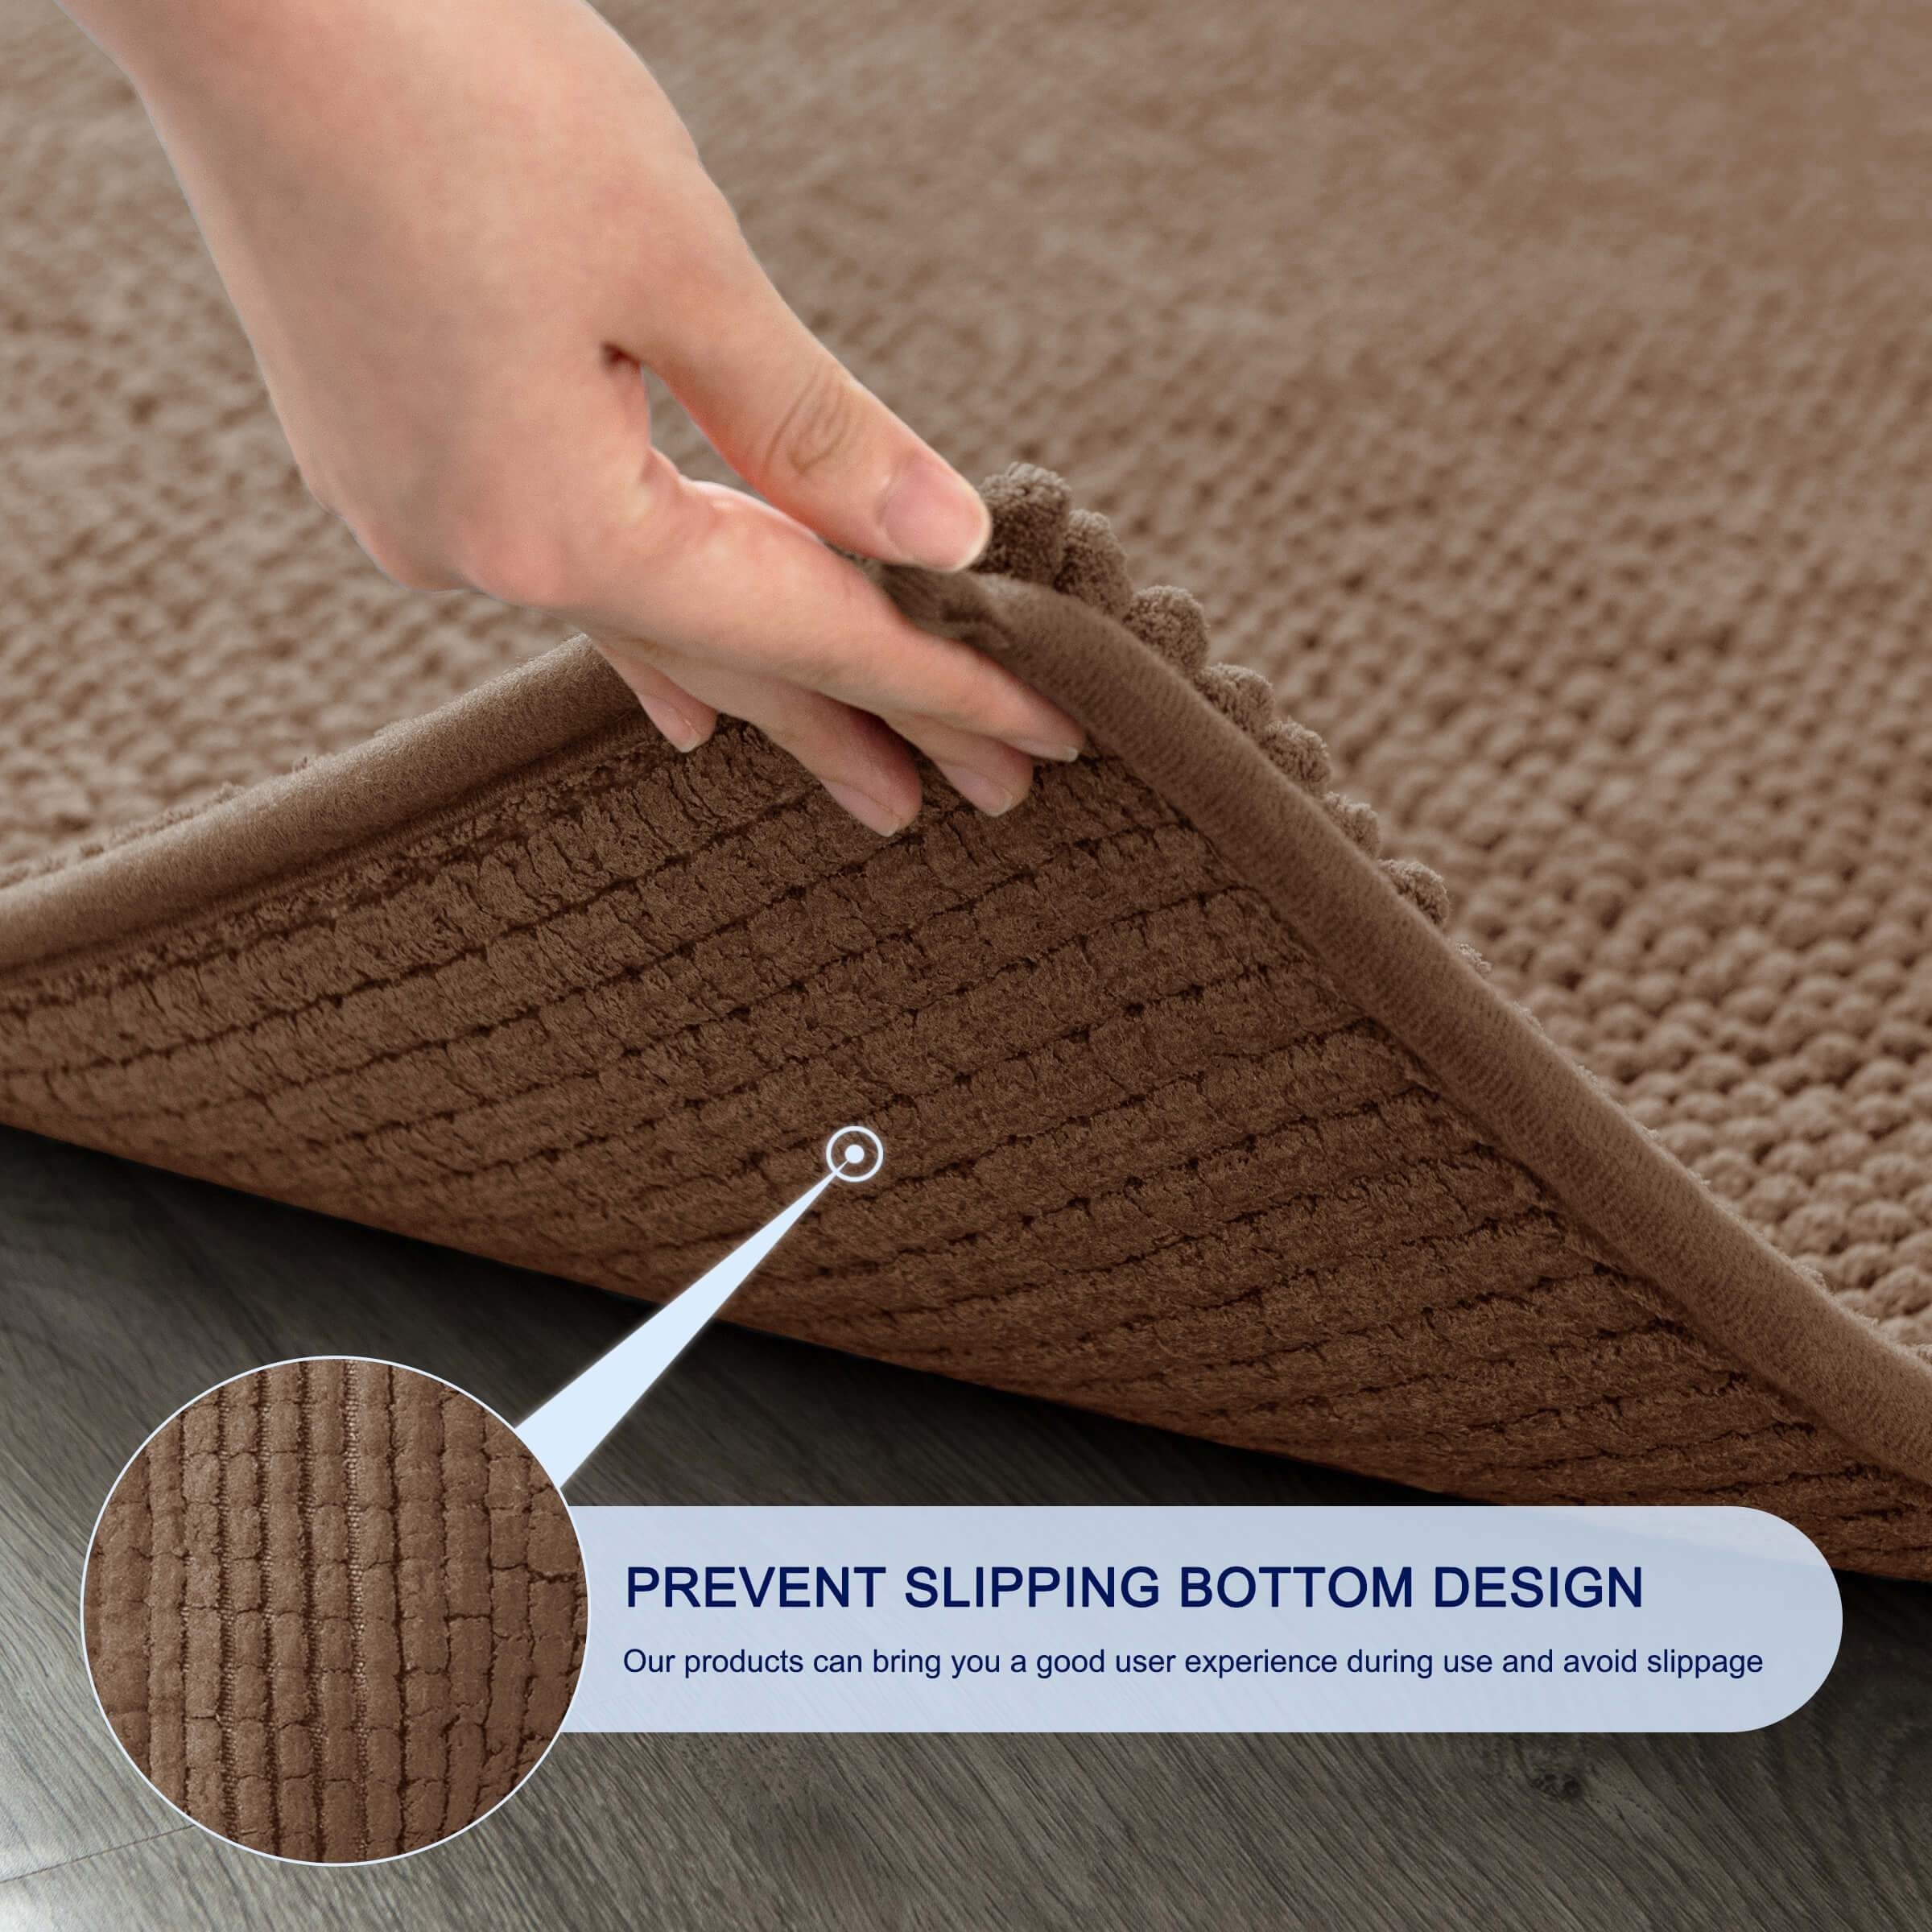 https://ak1.ostkcdn.com/images/products/is/images/direct/3bec258d602a13808ad599ad92970efc2d5cf124/Subrtex-Chenille-Bathroom-Rugs-Soft-Super-Water-Absorbing-Shower-Mats.jpg